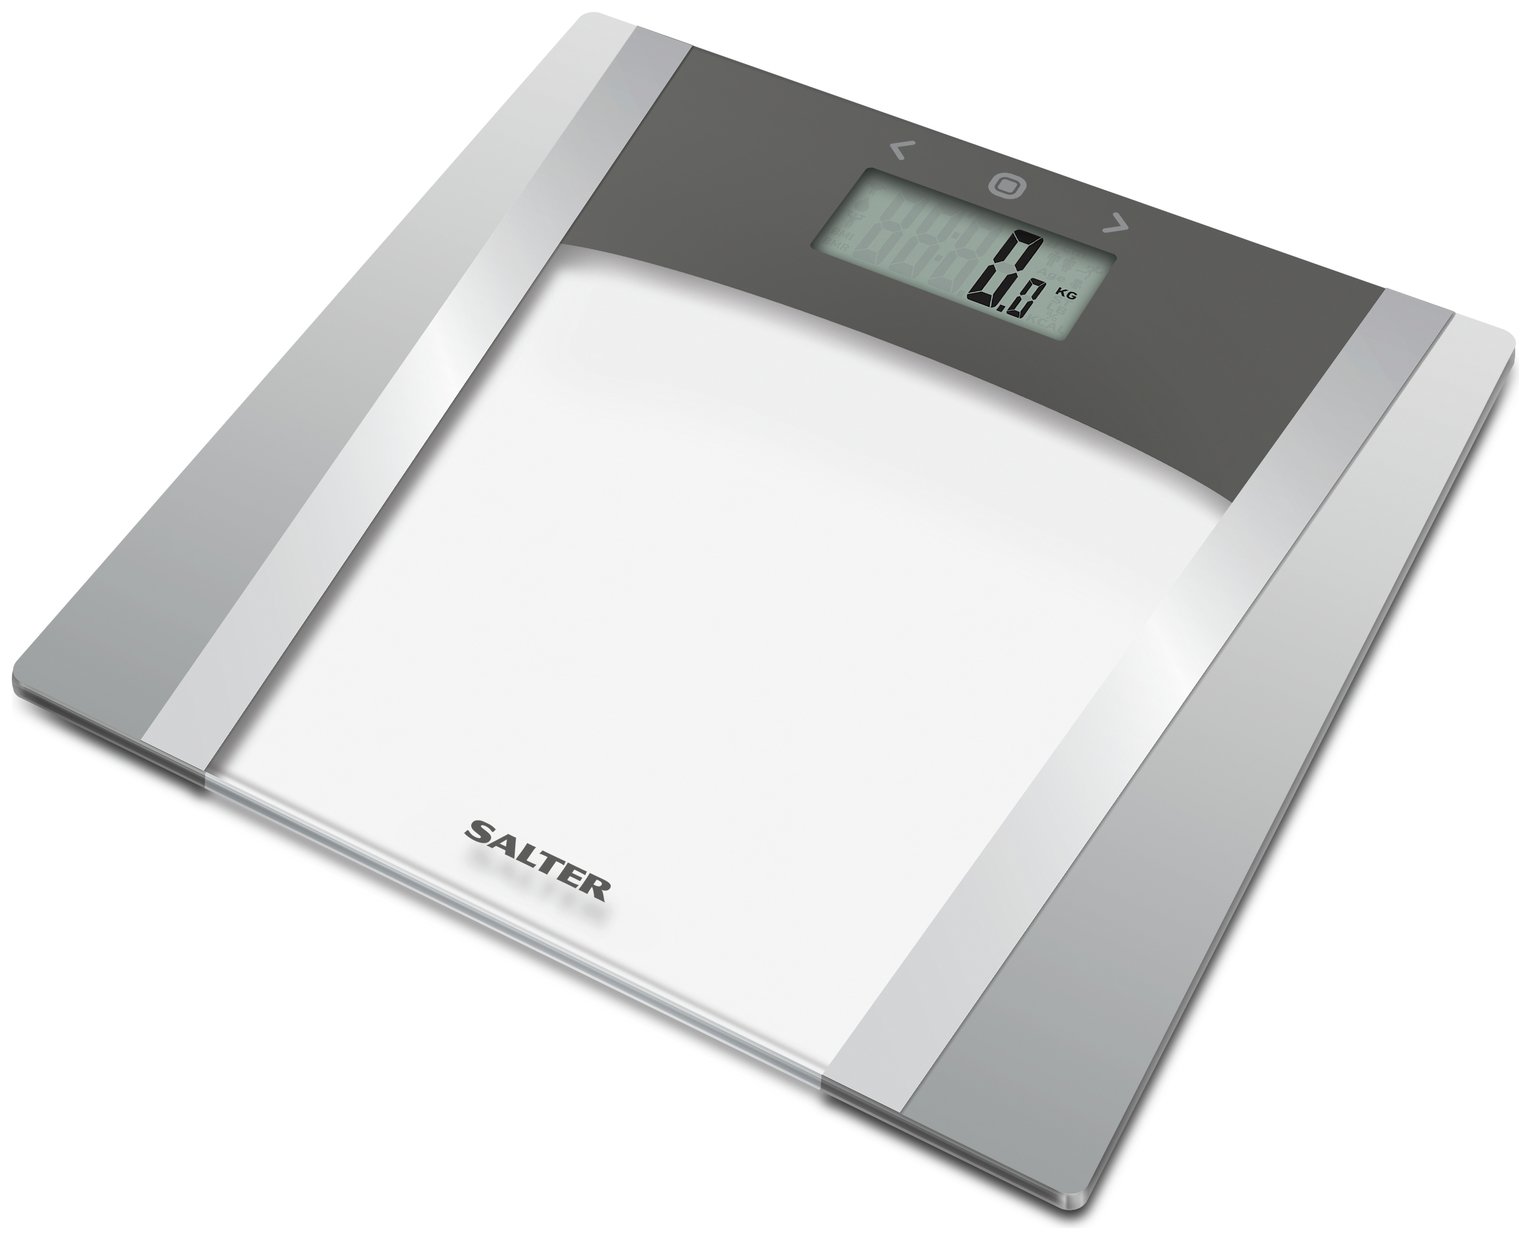 Salter Large Display Body Analyser Scale - Glass